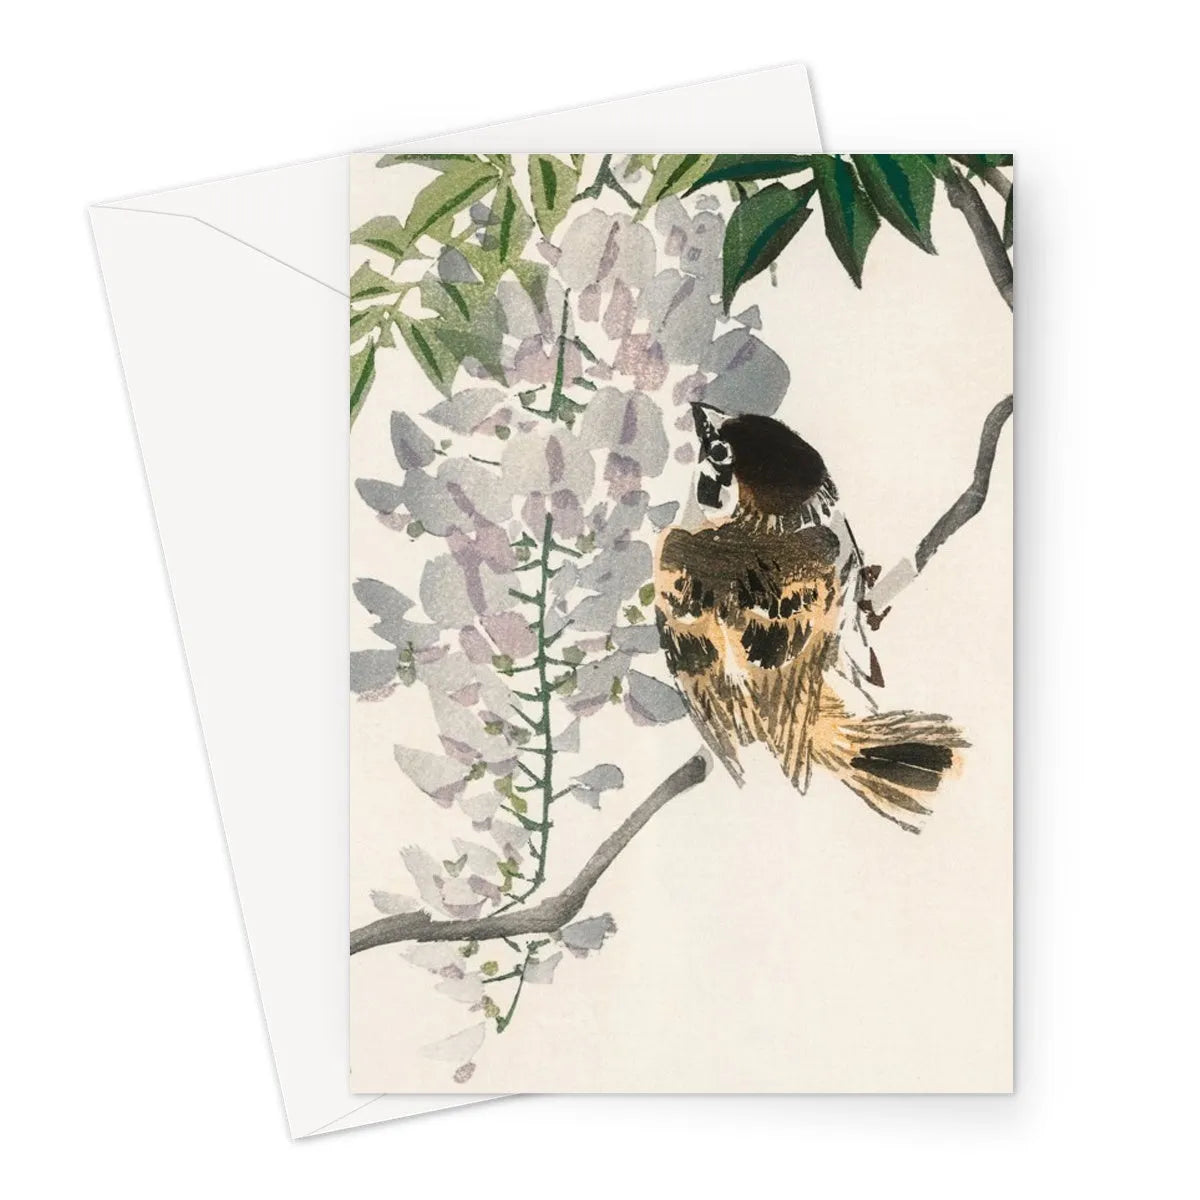 Sparrow On a Branch By Kōno Bairei Greeting Card - A5 Portrait / 1 Card - Greeting & Note Cards - Aesthetic Art